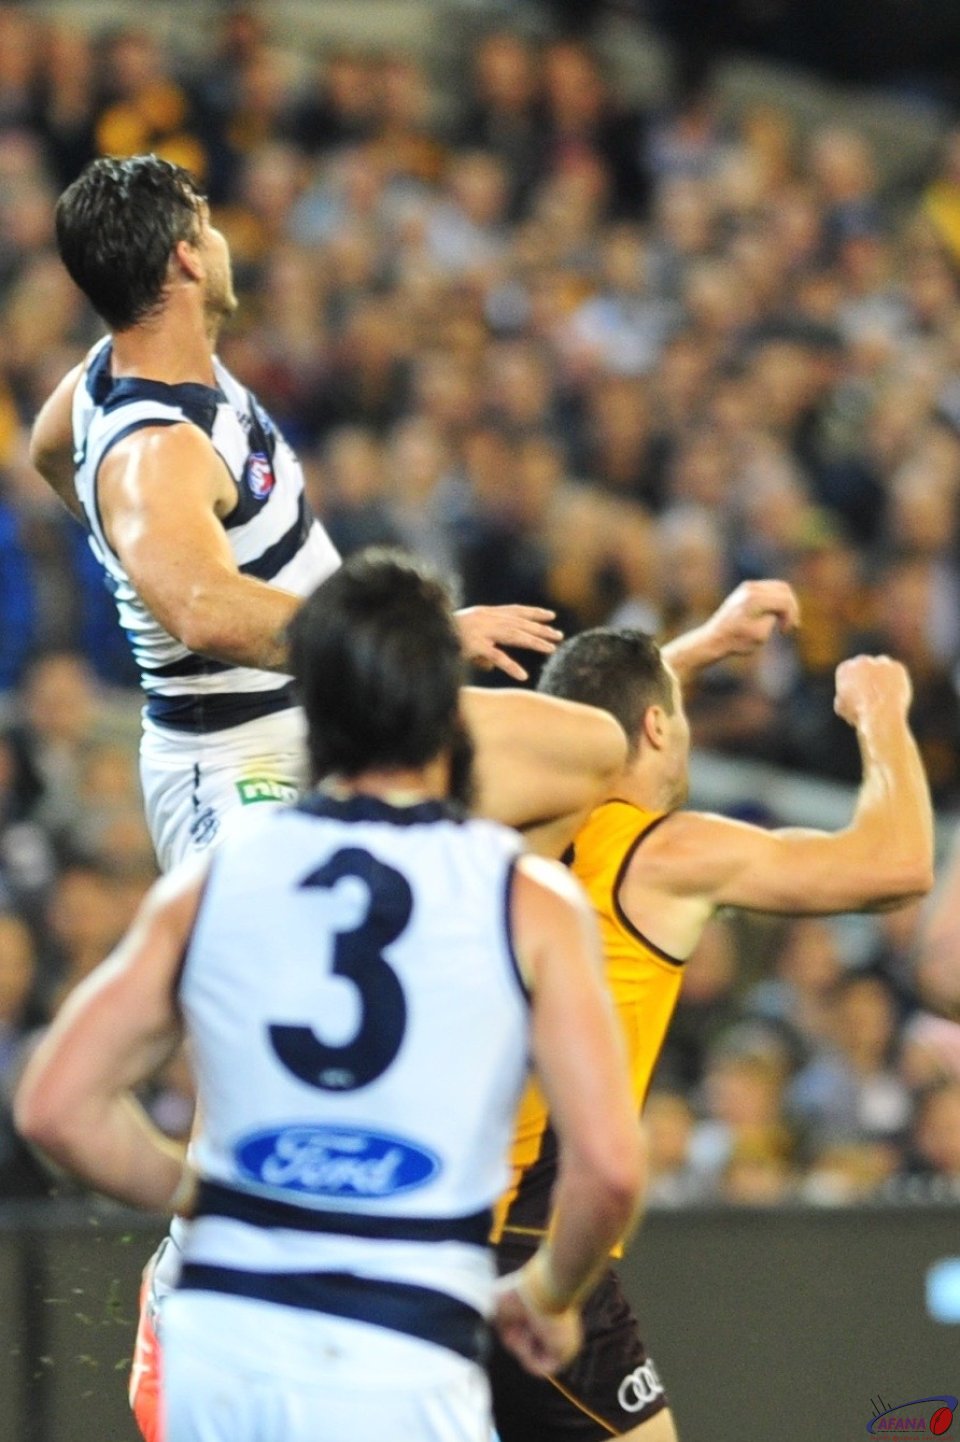 Tom Hawkins plants his knee into James Frawley as he gets air for a hanger